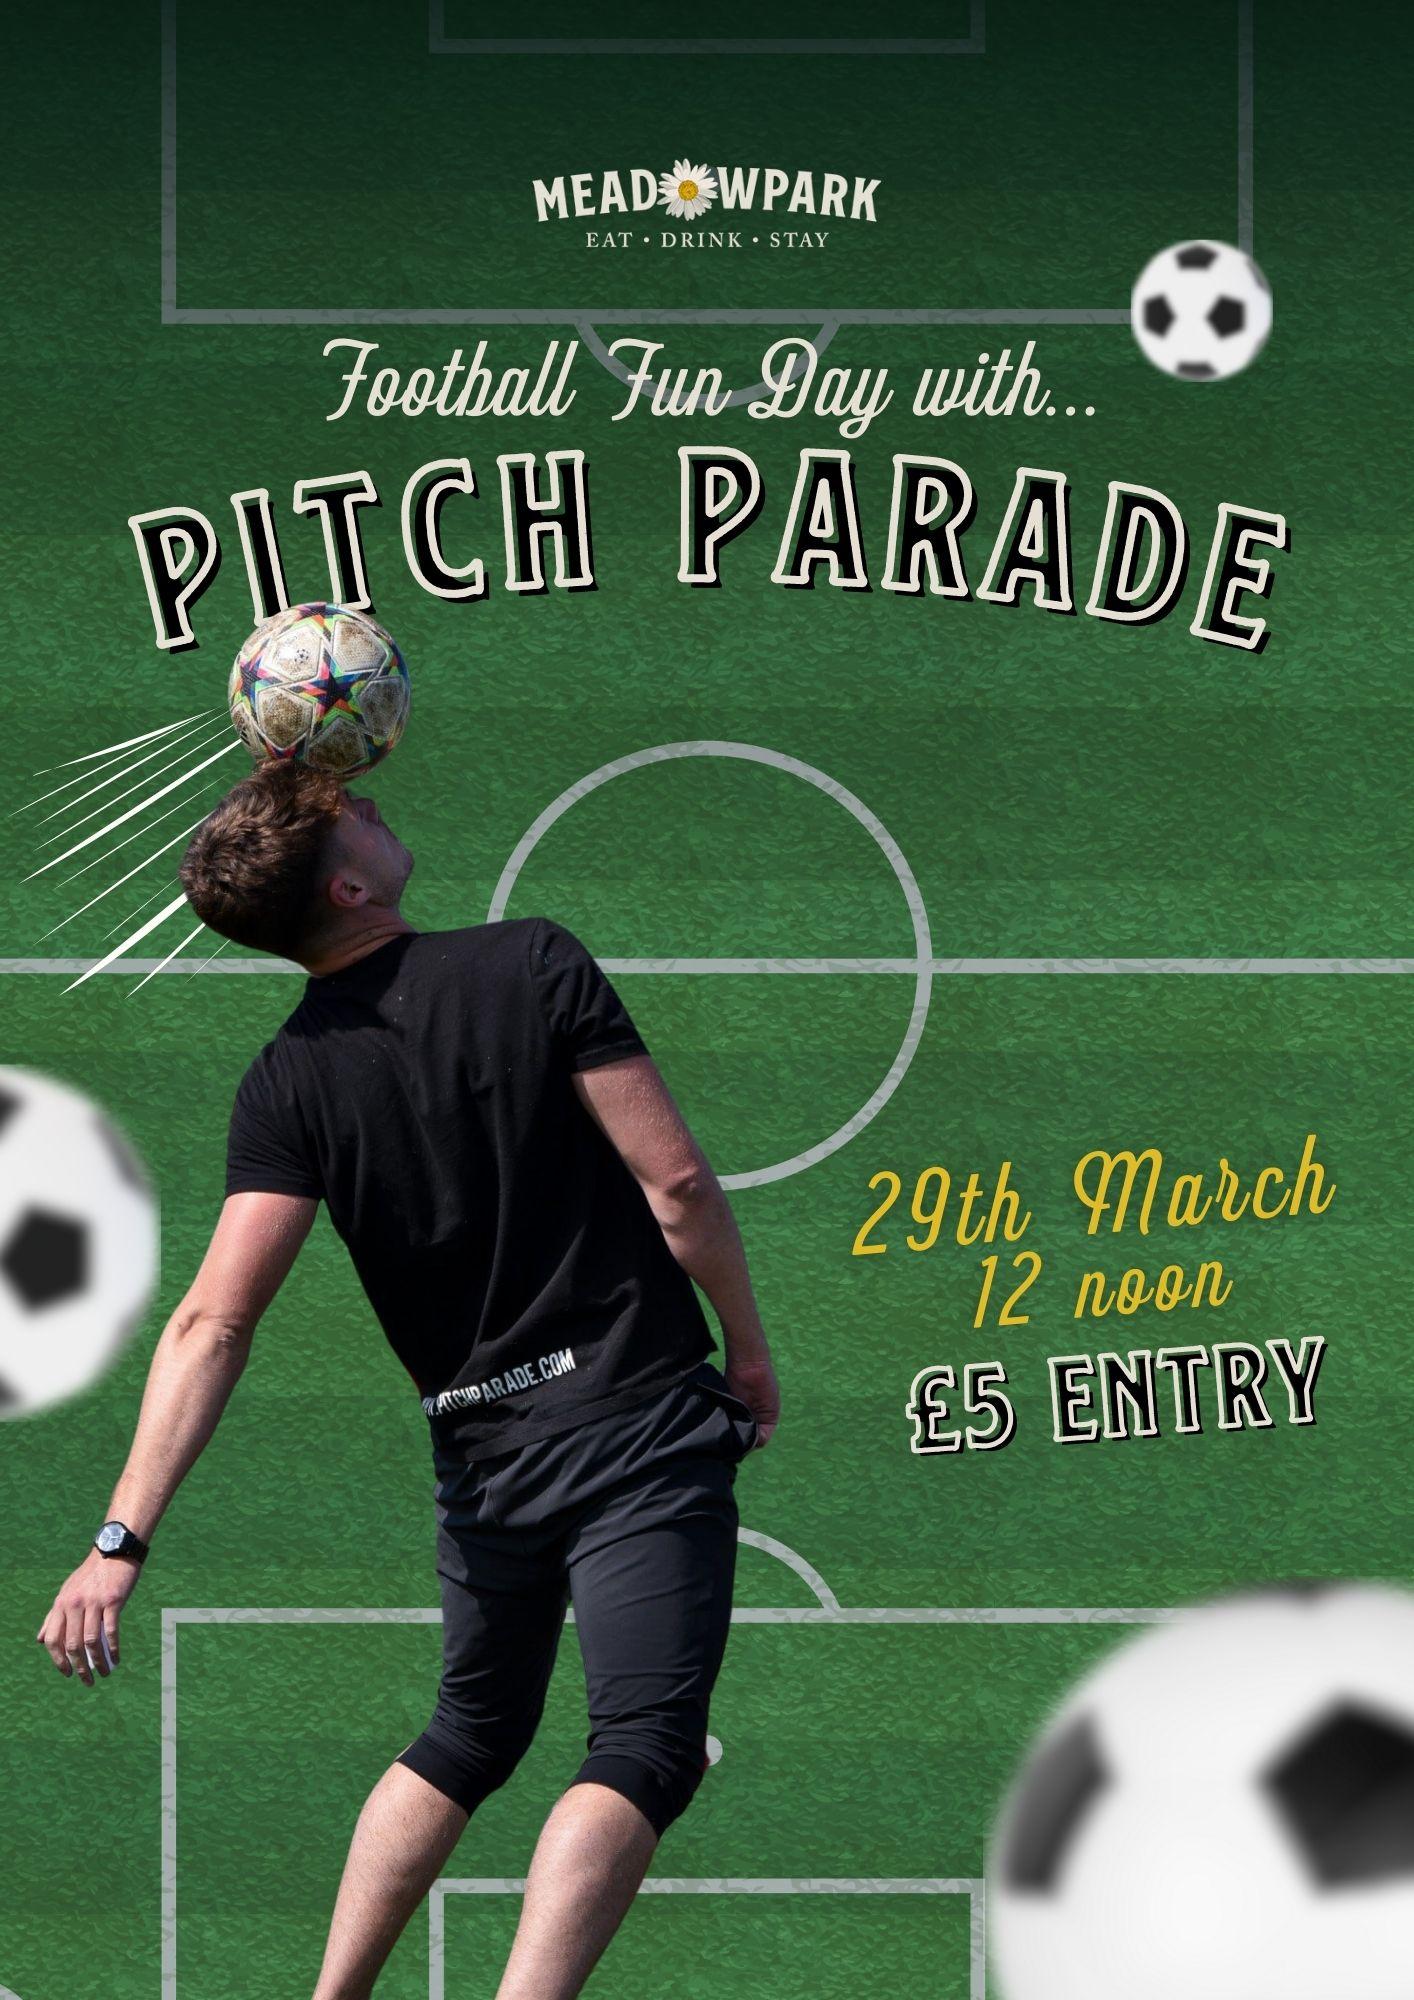 Pitch Parade Poster - Football fun day of entertainment at The Meadowpark Marque on 29th March at 12 noon. £5 entry on the door.